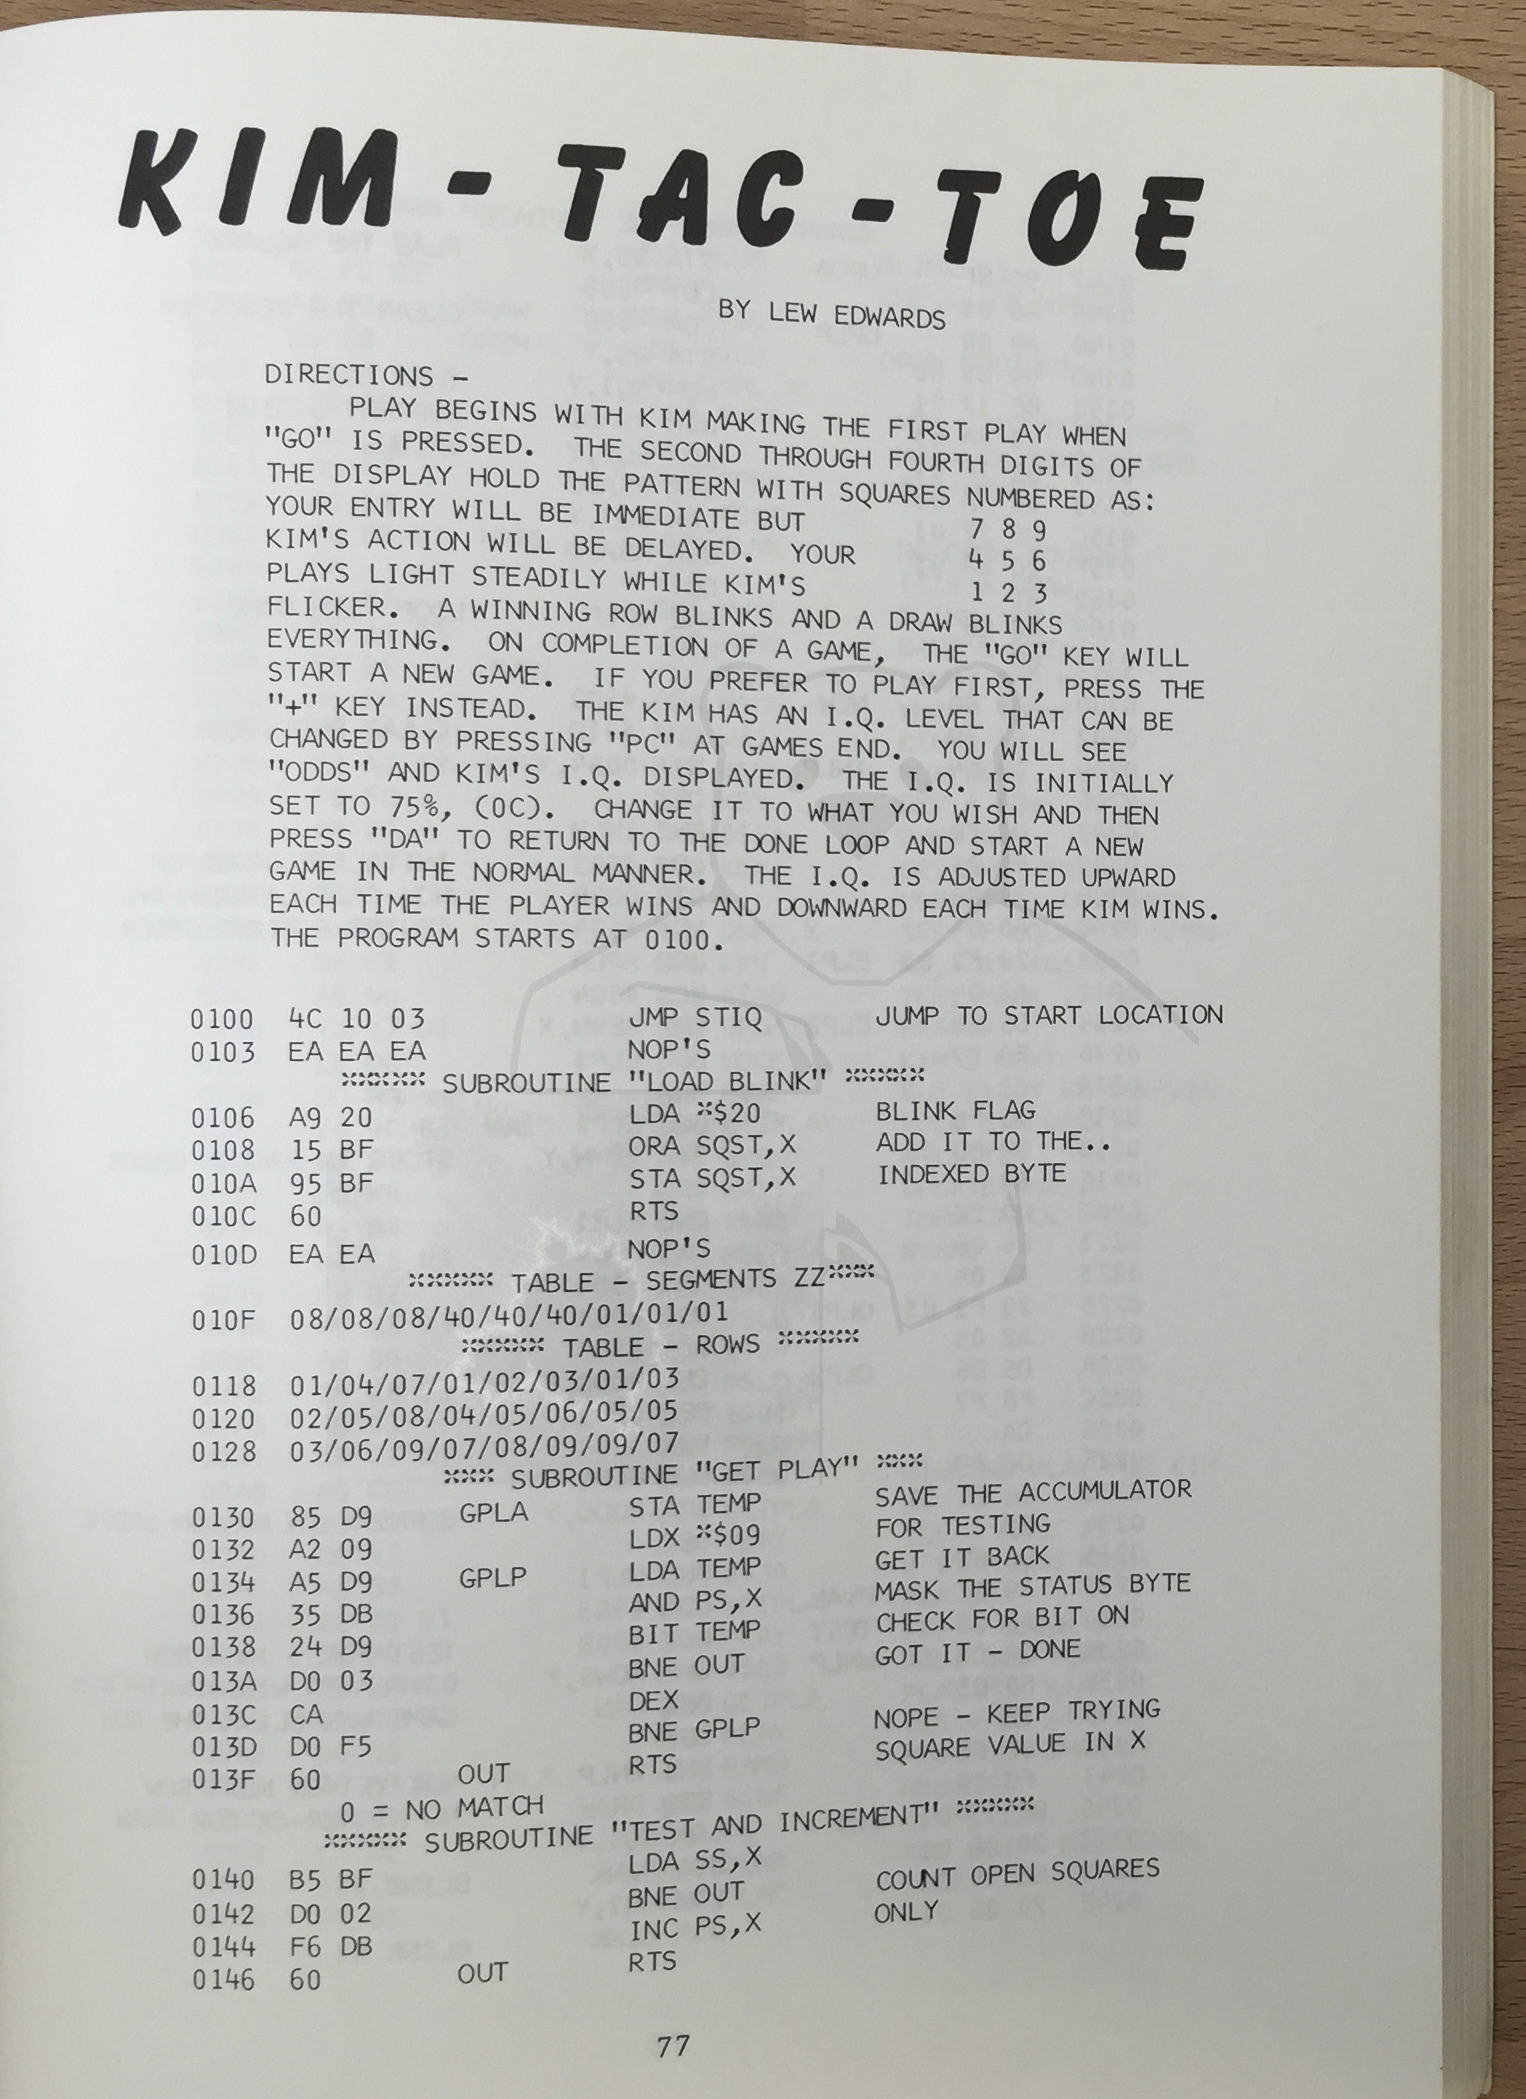 Commodore MOS KIM-1 - The First Book of KIM